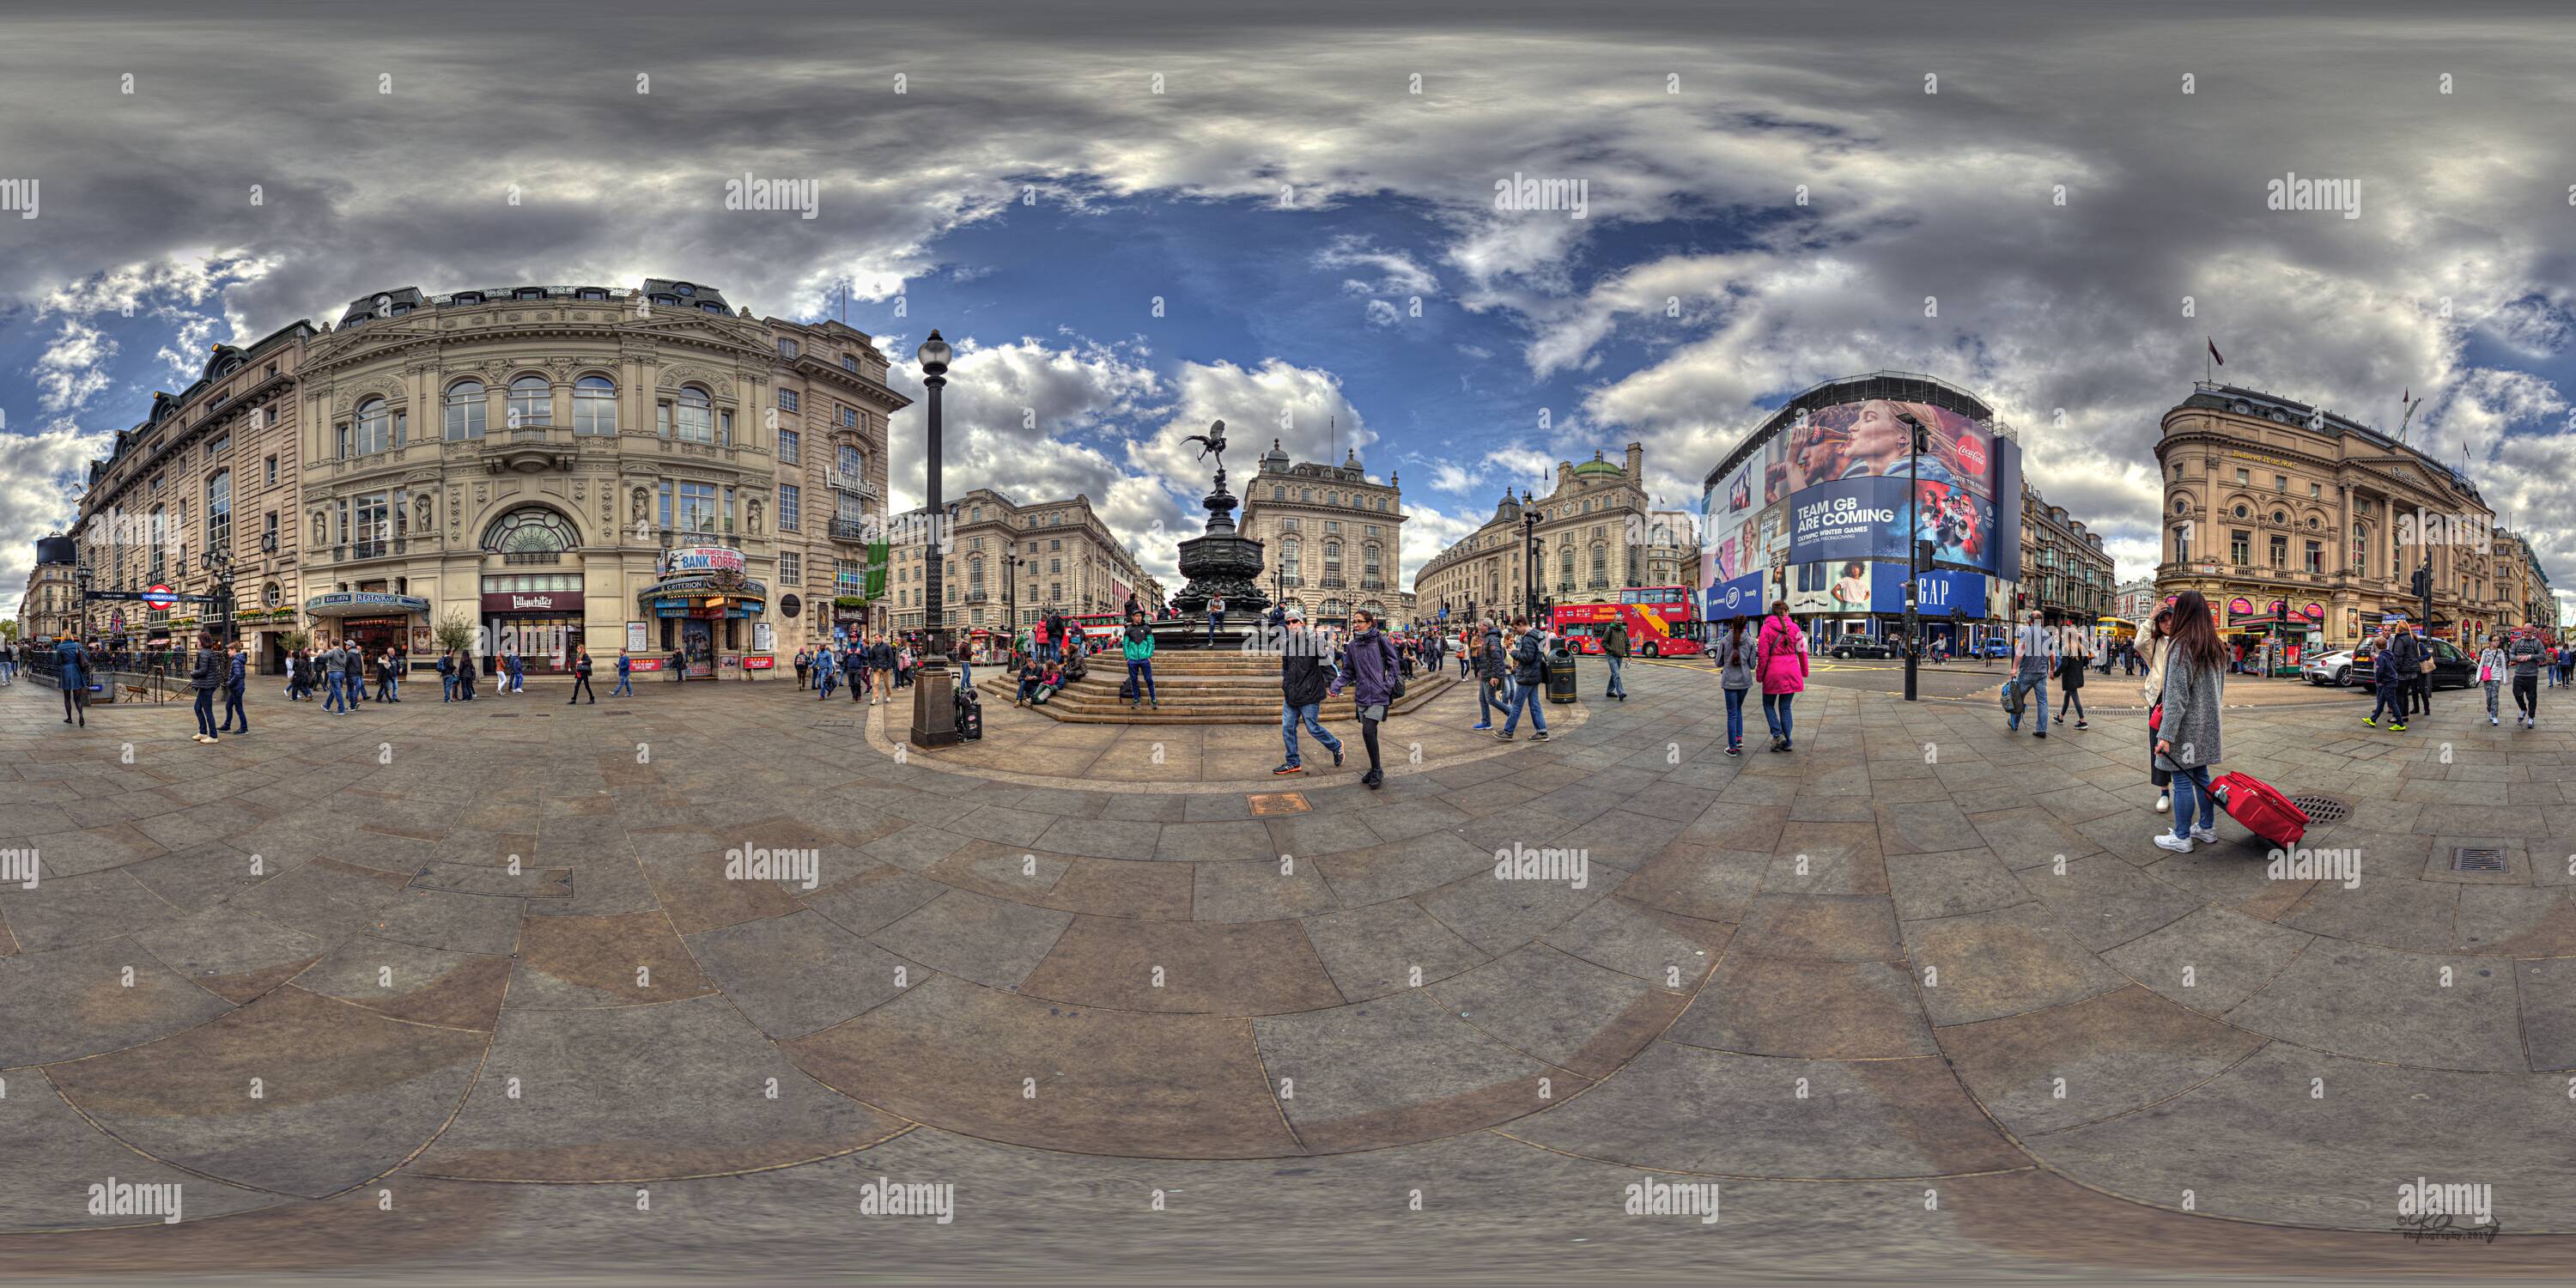 360 degree panoramic view of London's Picadilly Circus :)